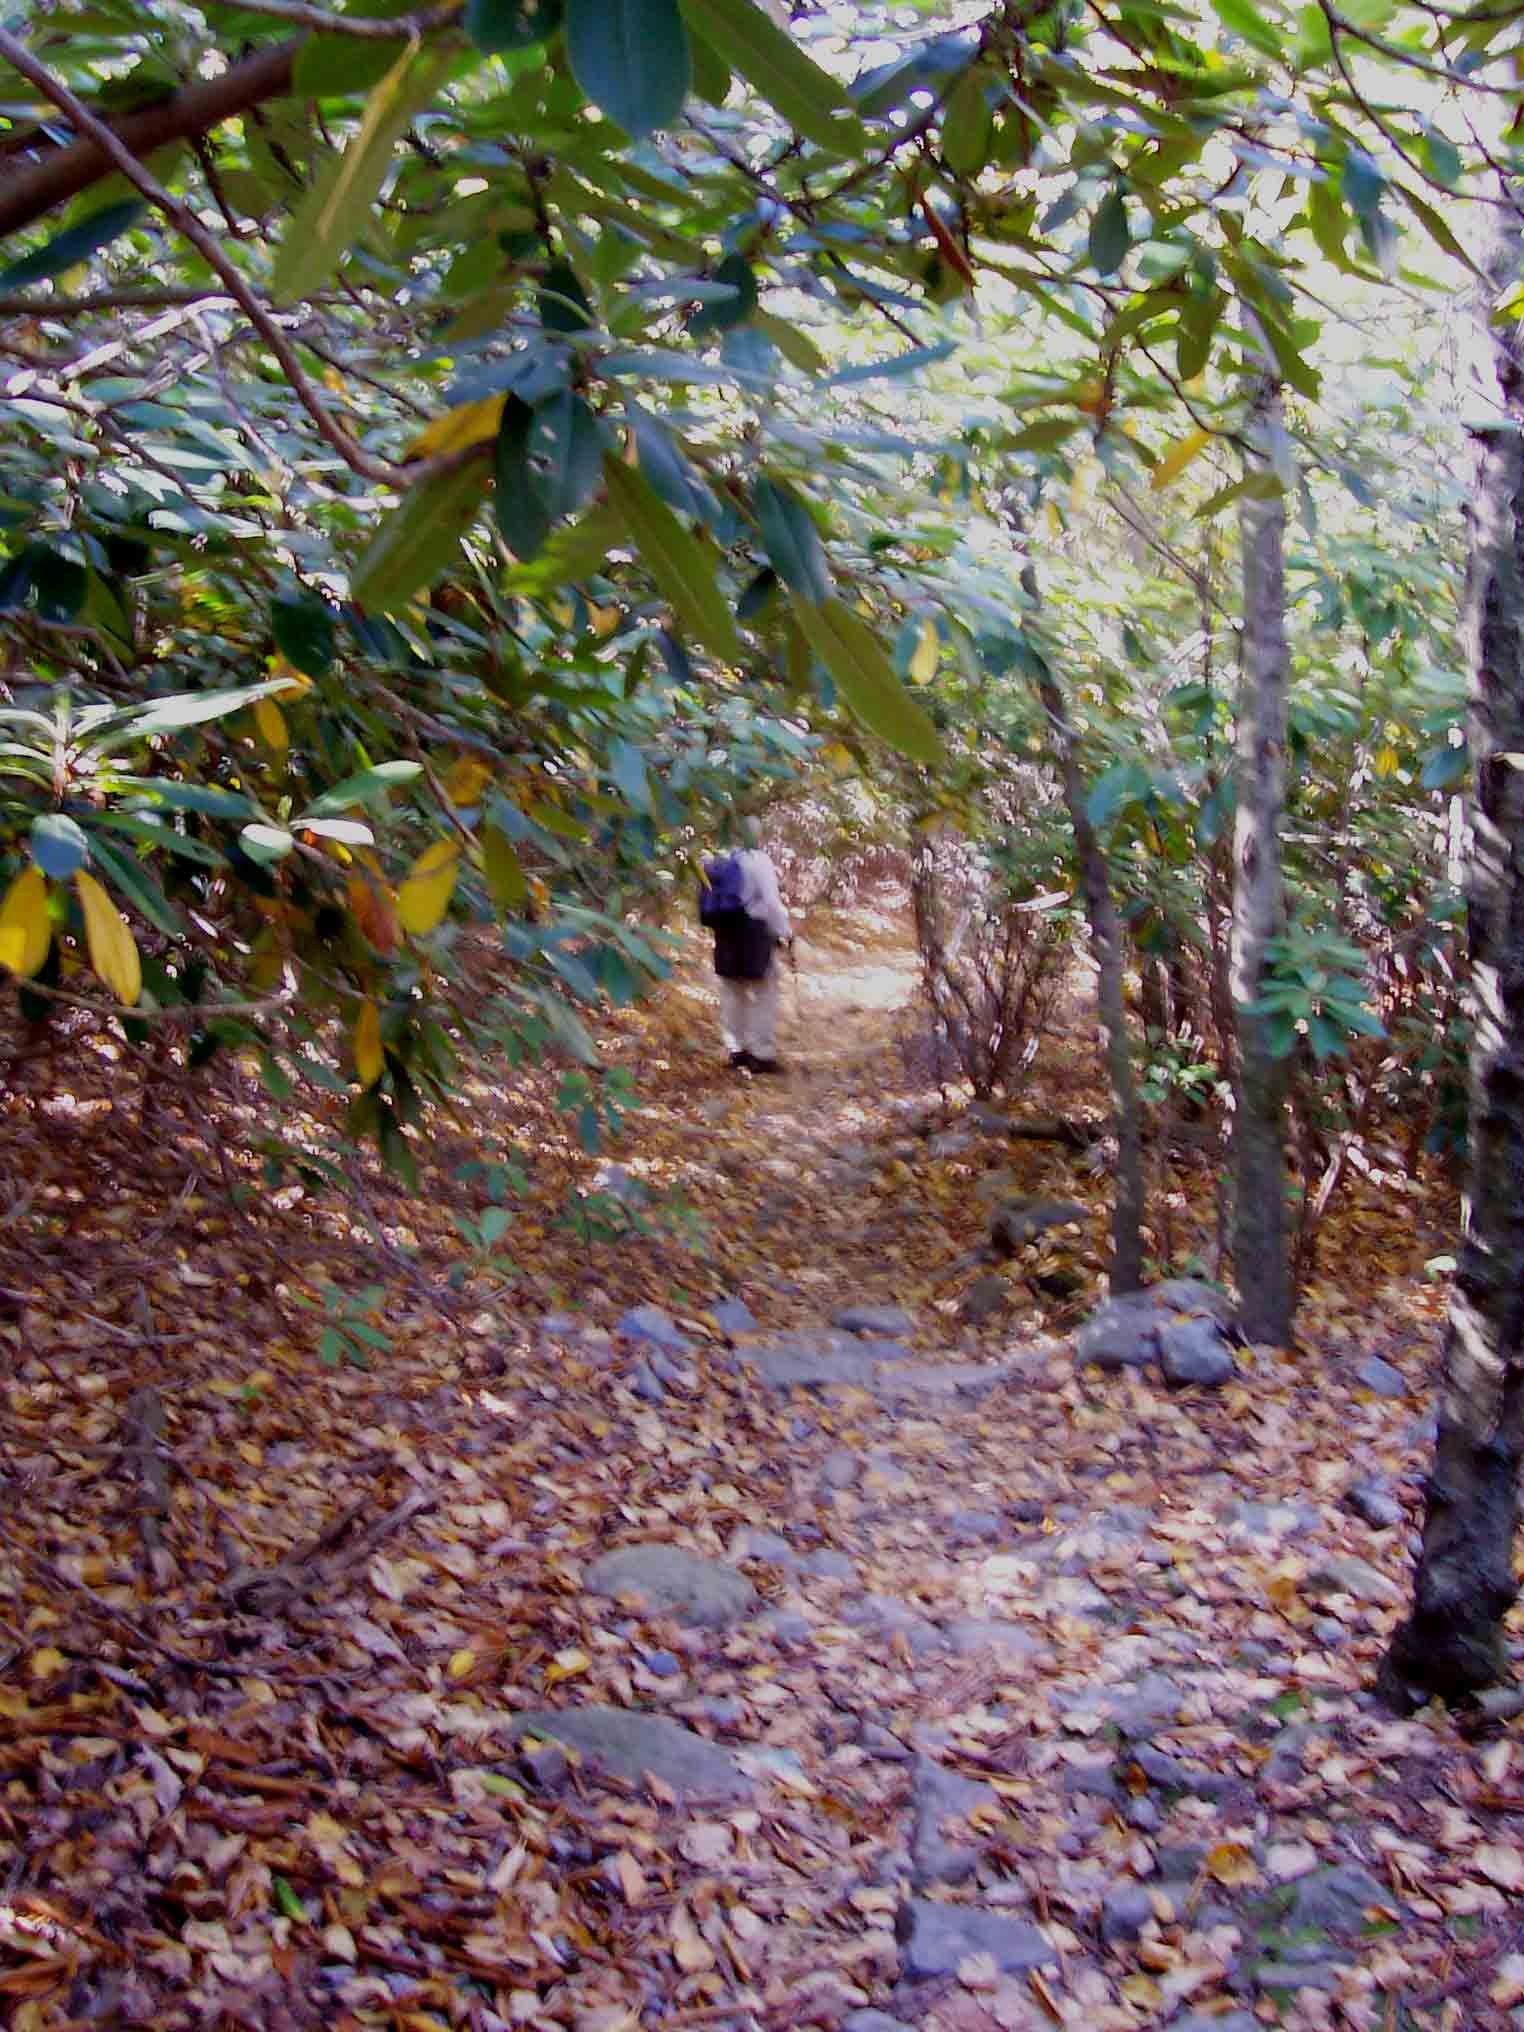 The trail runs through a large area of rhododendron thickets. Taken at approx. MM 2.2.  Courtesy dlcul@conncoll.edu